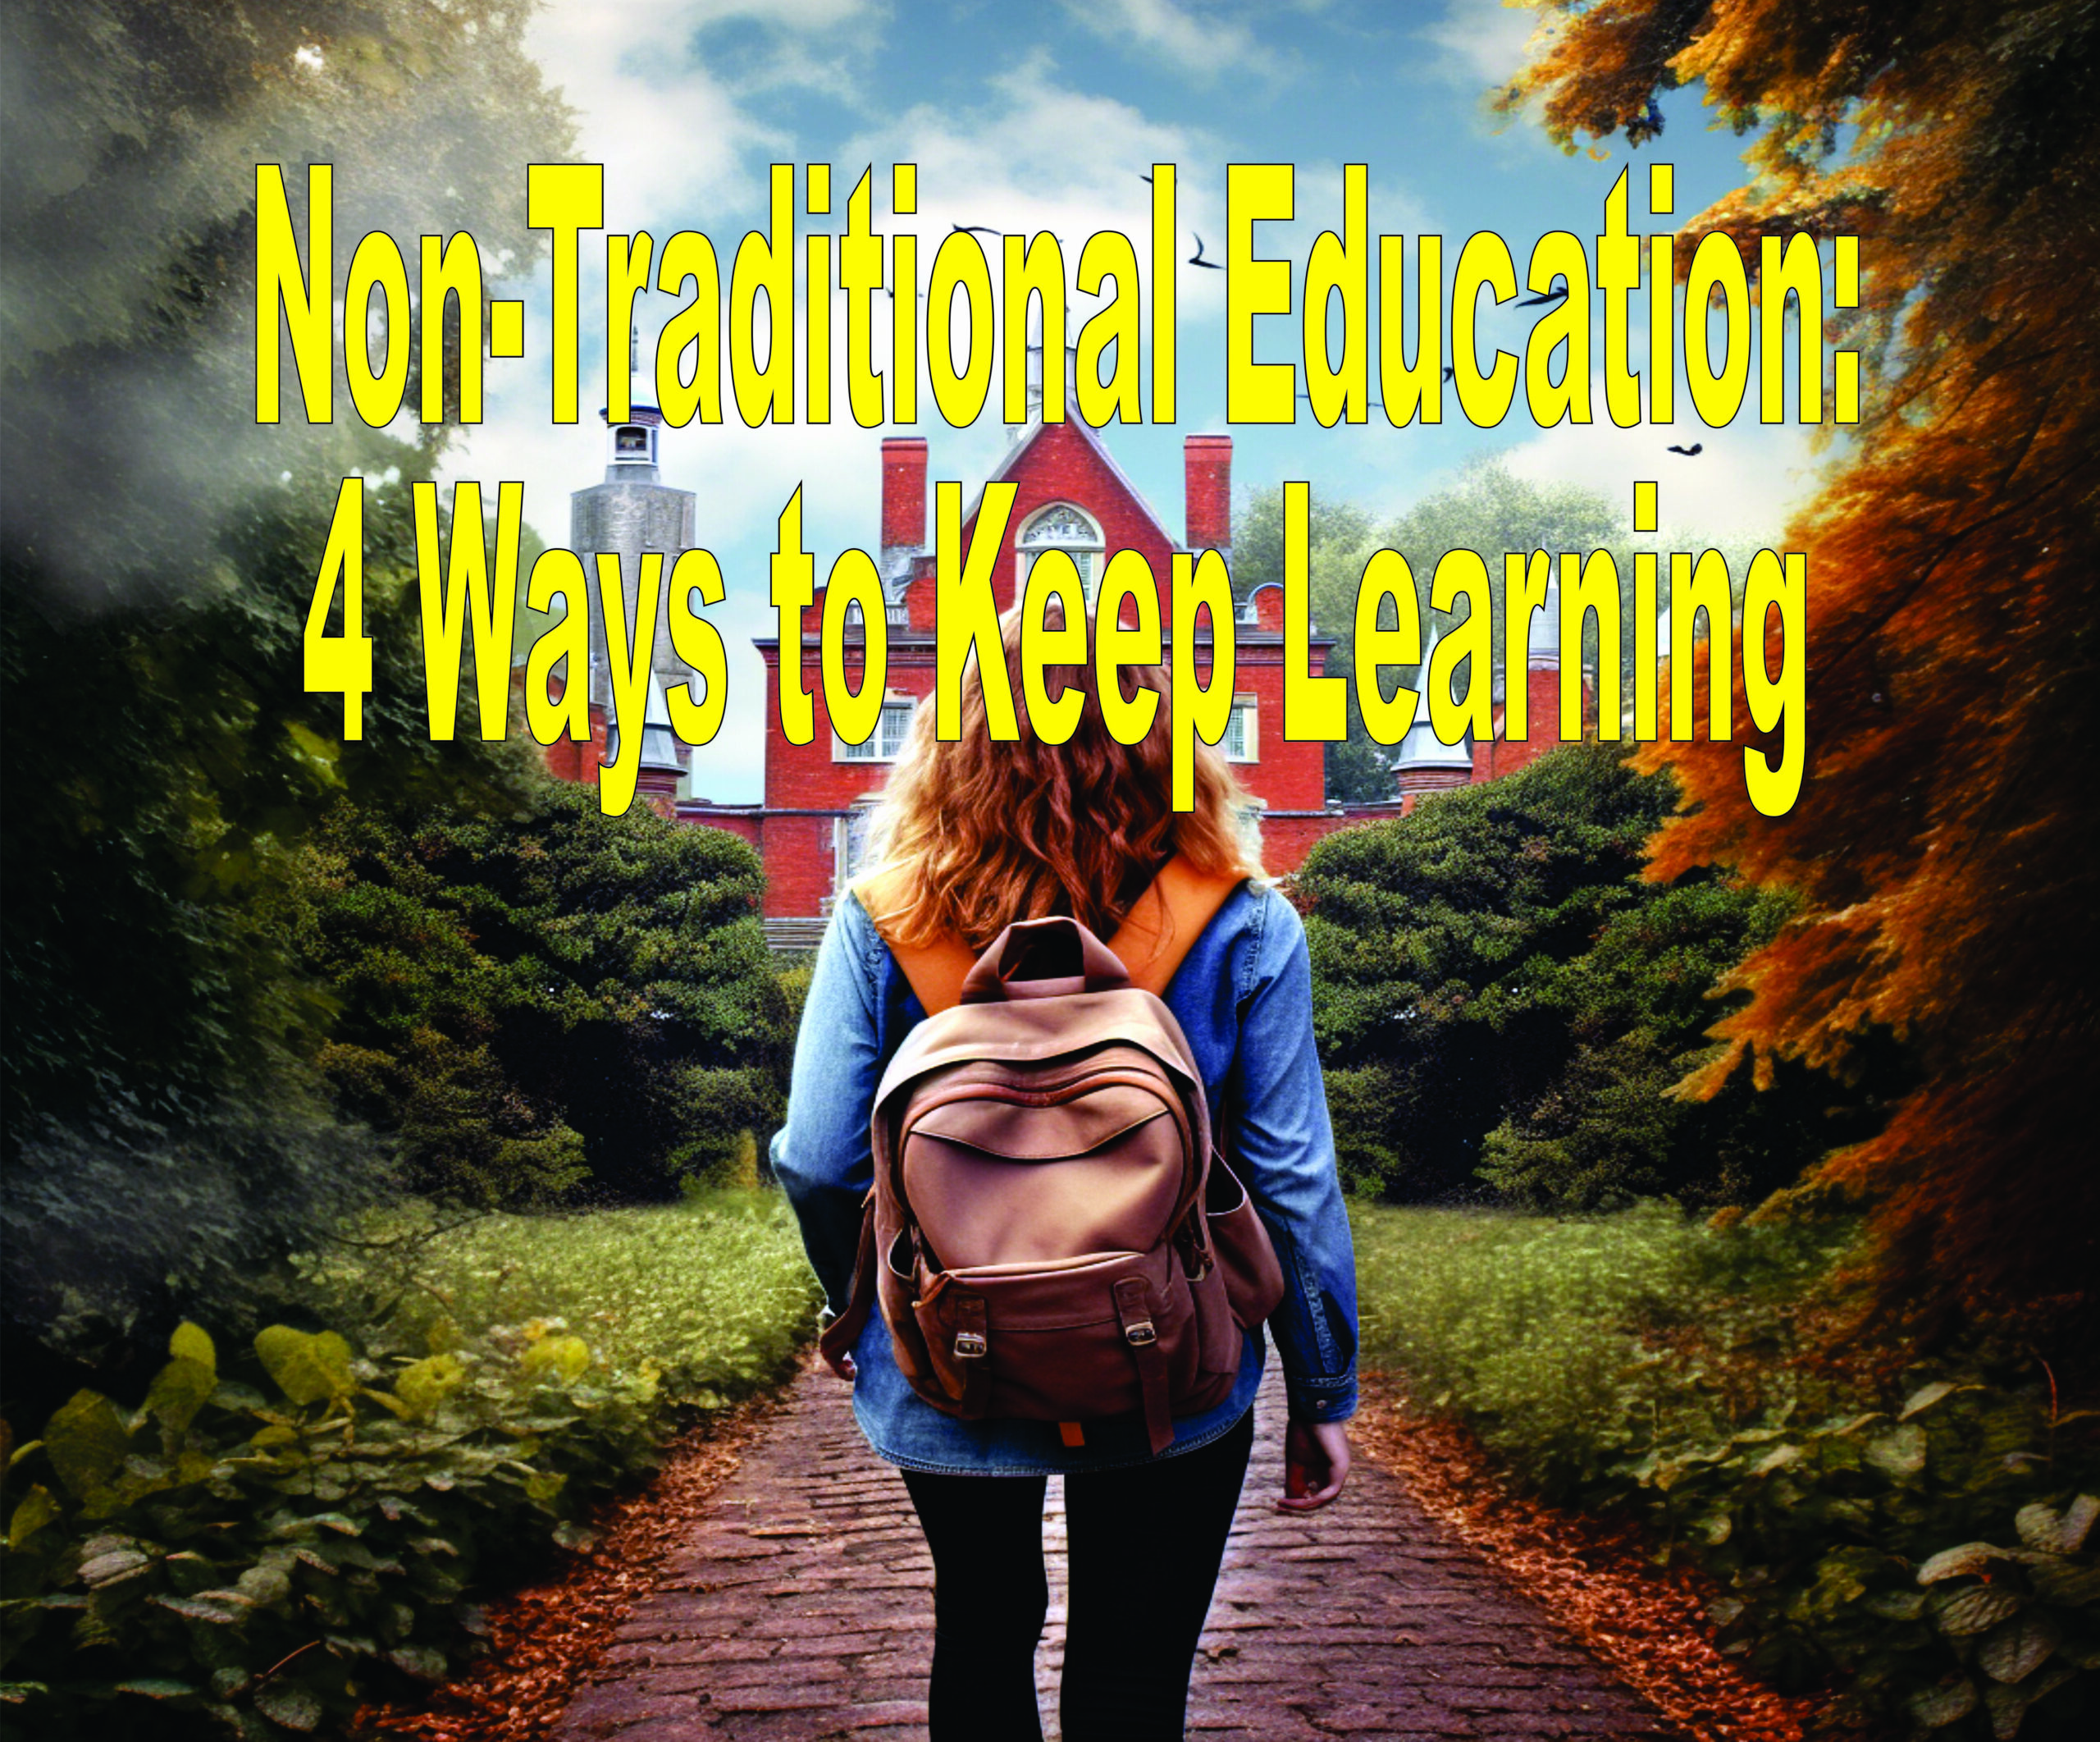 Non Traditional Education 4 Ways To Keep Learning